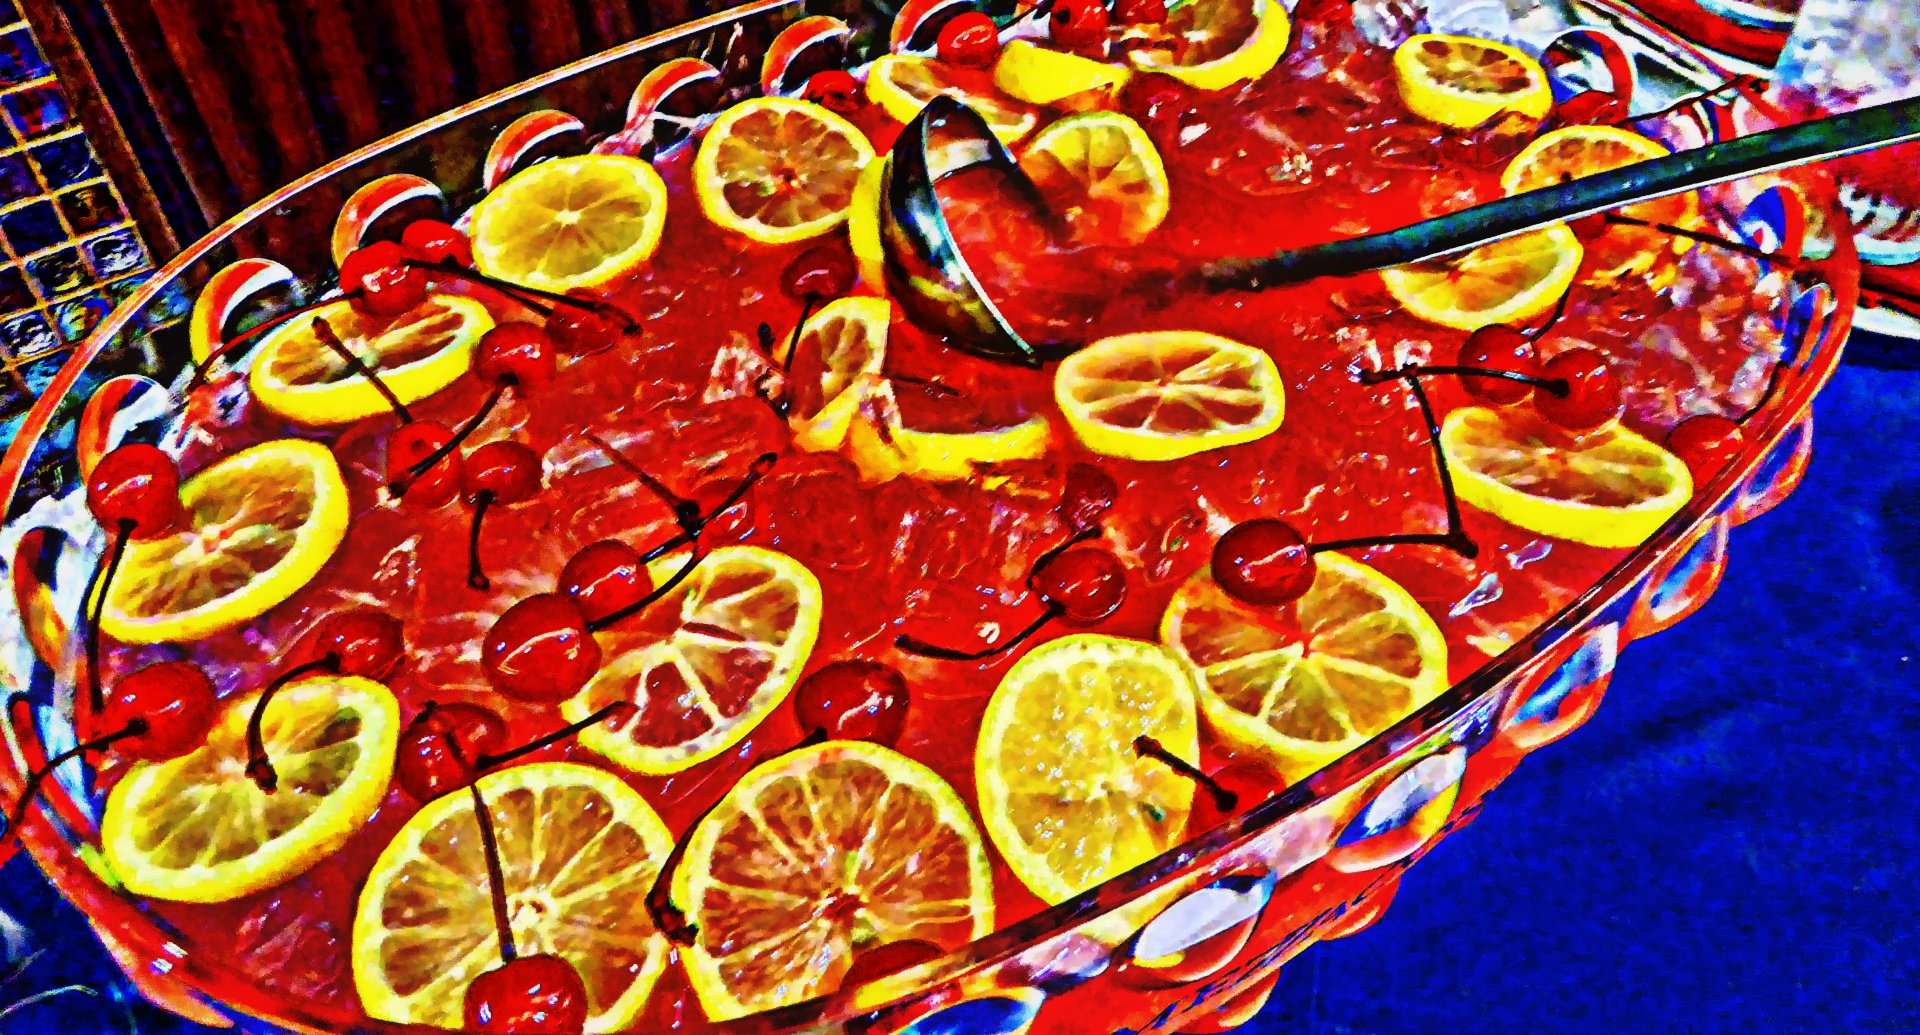 punch drink party free photo